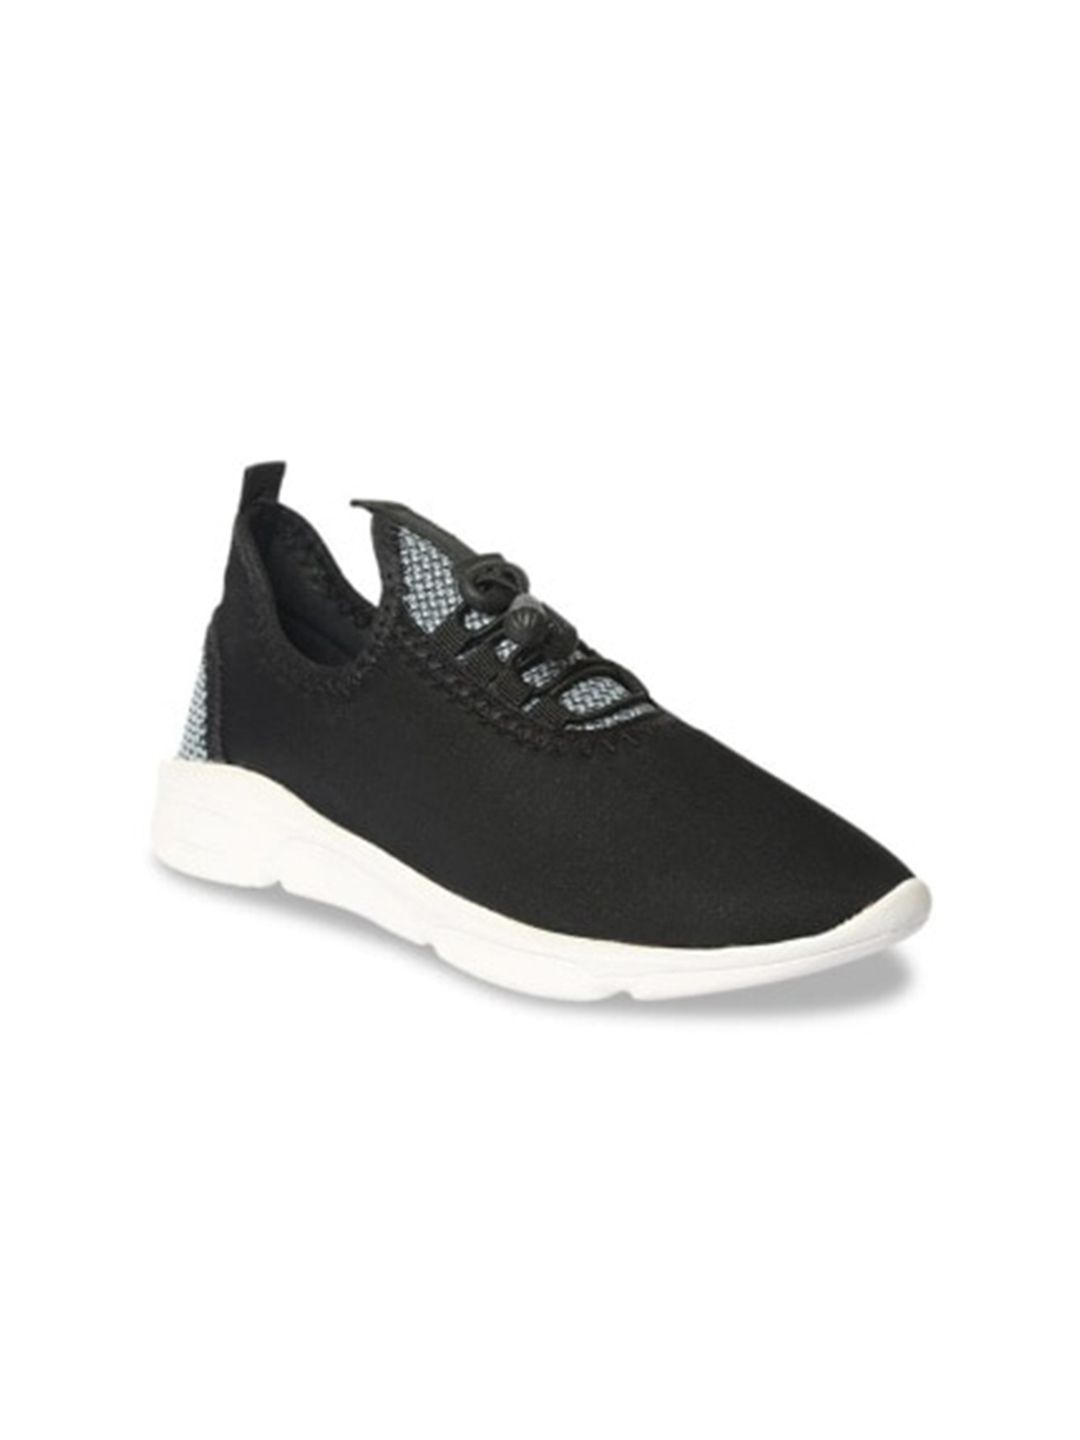 WOMENS BERRY Women Black Woven Design Sneakers Price in India